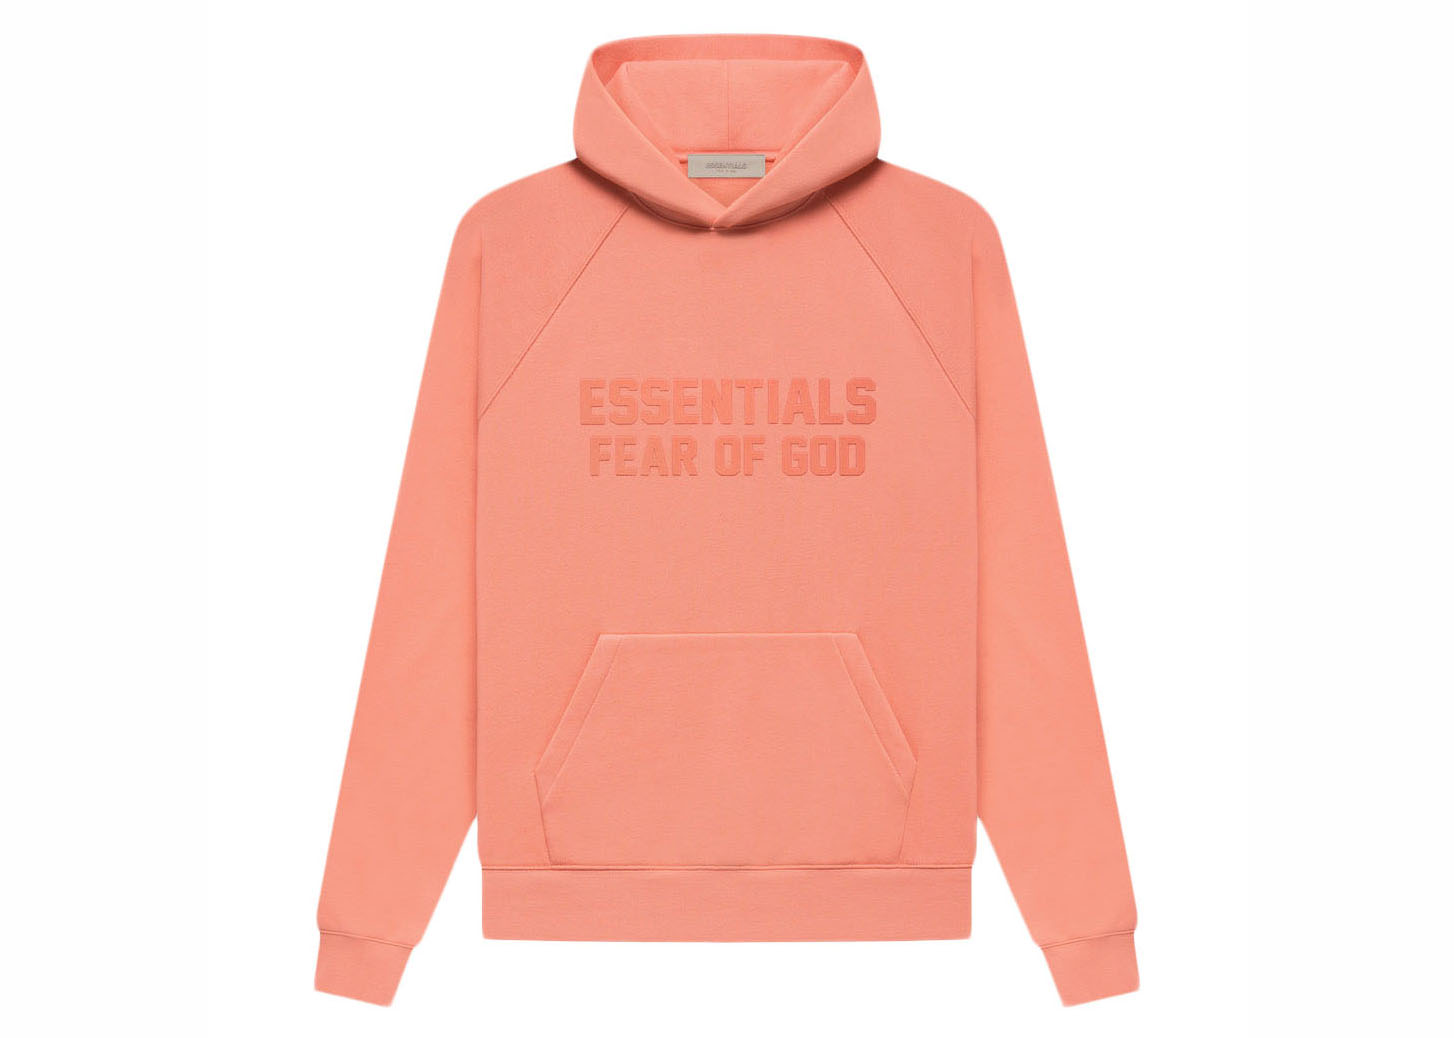 WHAT SIZE SHOULD YOU GET IN FEAR OF GOD ESSENTIALS HOODIES? Short ans, Essentials Hoodie Size Fitting